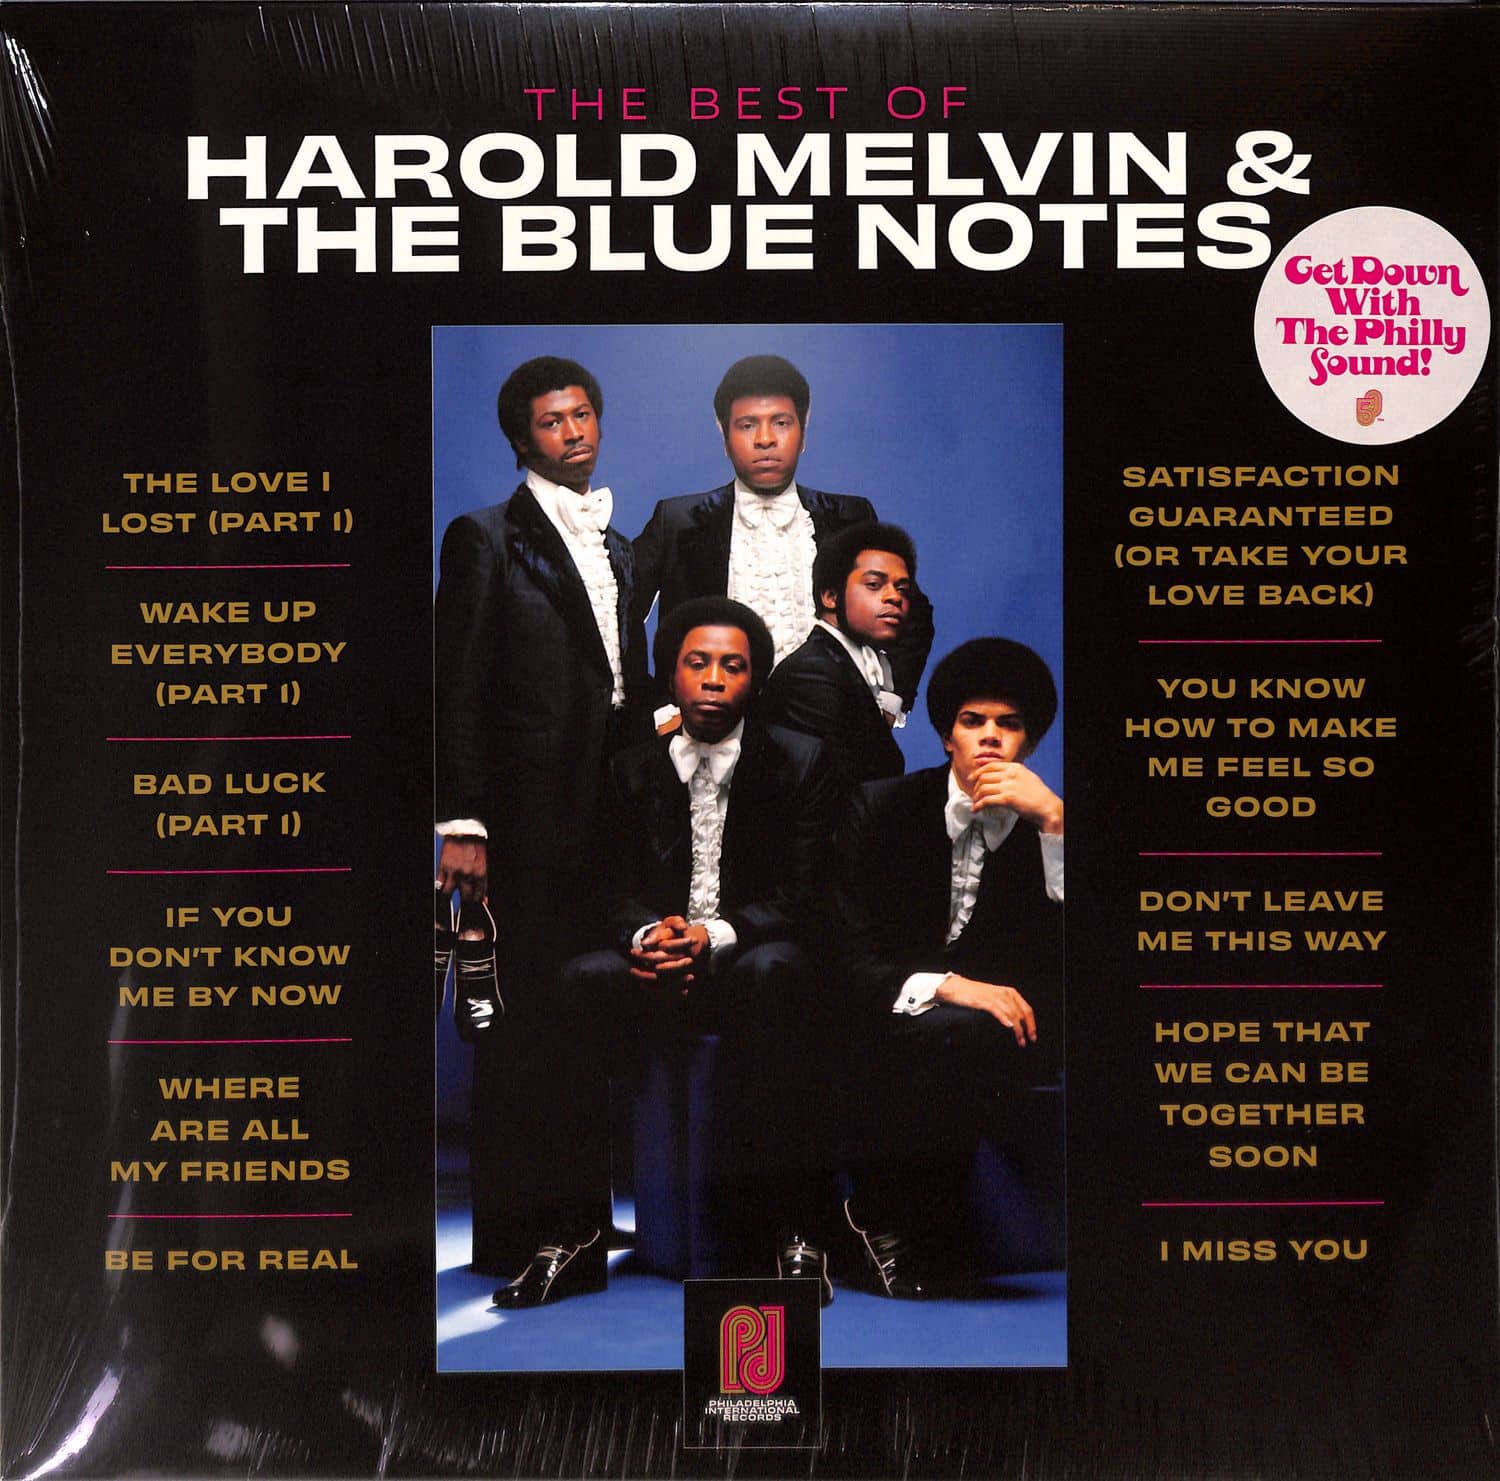 Harold Melvin & The Blue Notes - THE BEST OF HAROLD MELVIN & THE BLUE NOTES 